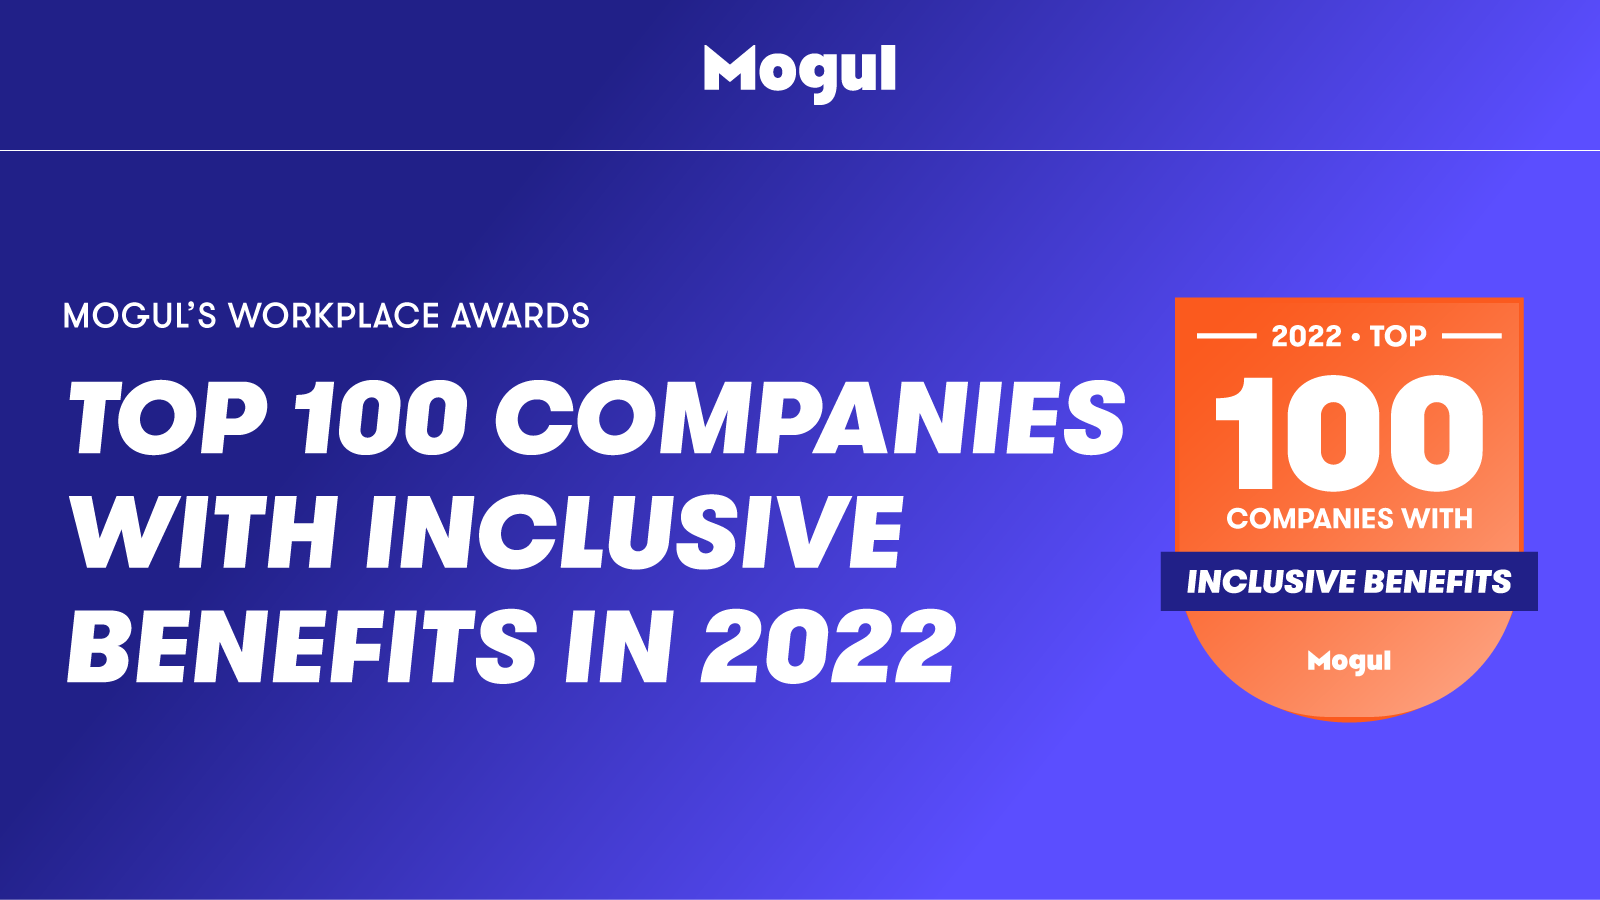 https://hub.onmogul.com/hubfs/Mogul-Top-100-Companies-With-Inclusive-Benefits-in-2022-feat.png